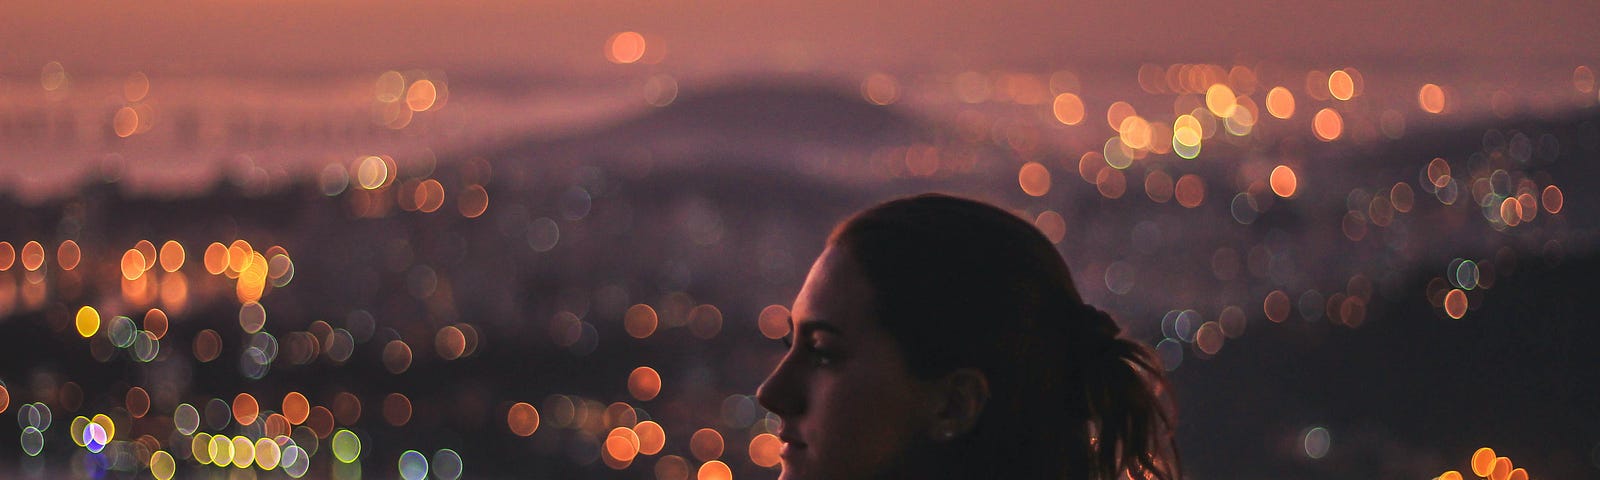 A woman looks out into the distance at sunrise. The city skyline is behind her.